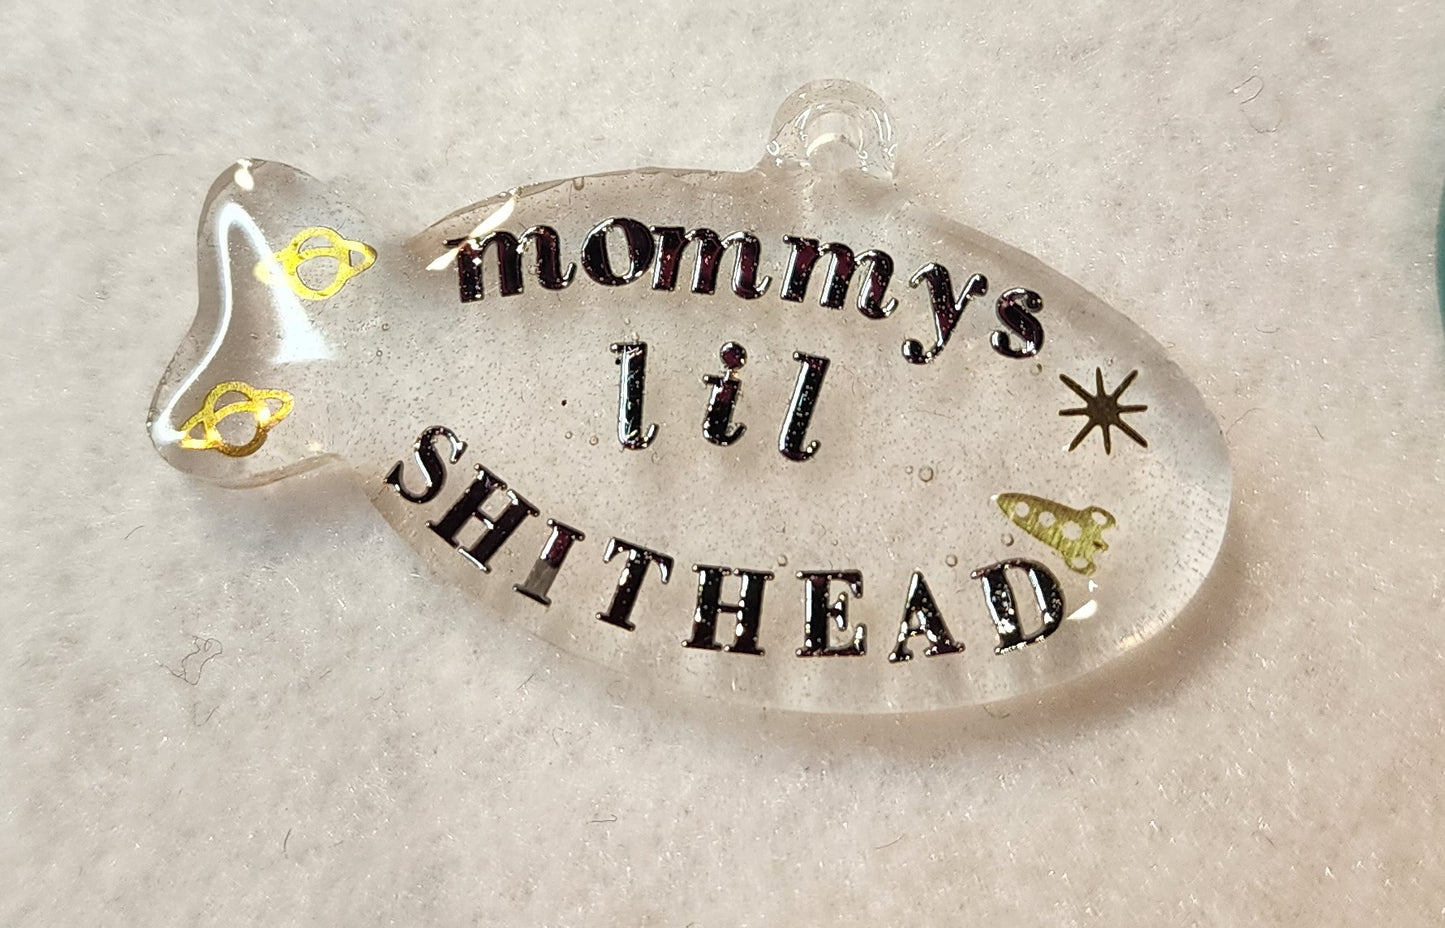 Tag- mommys little shithead